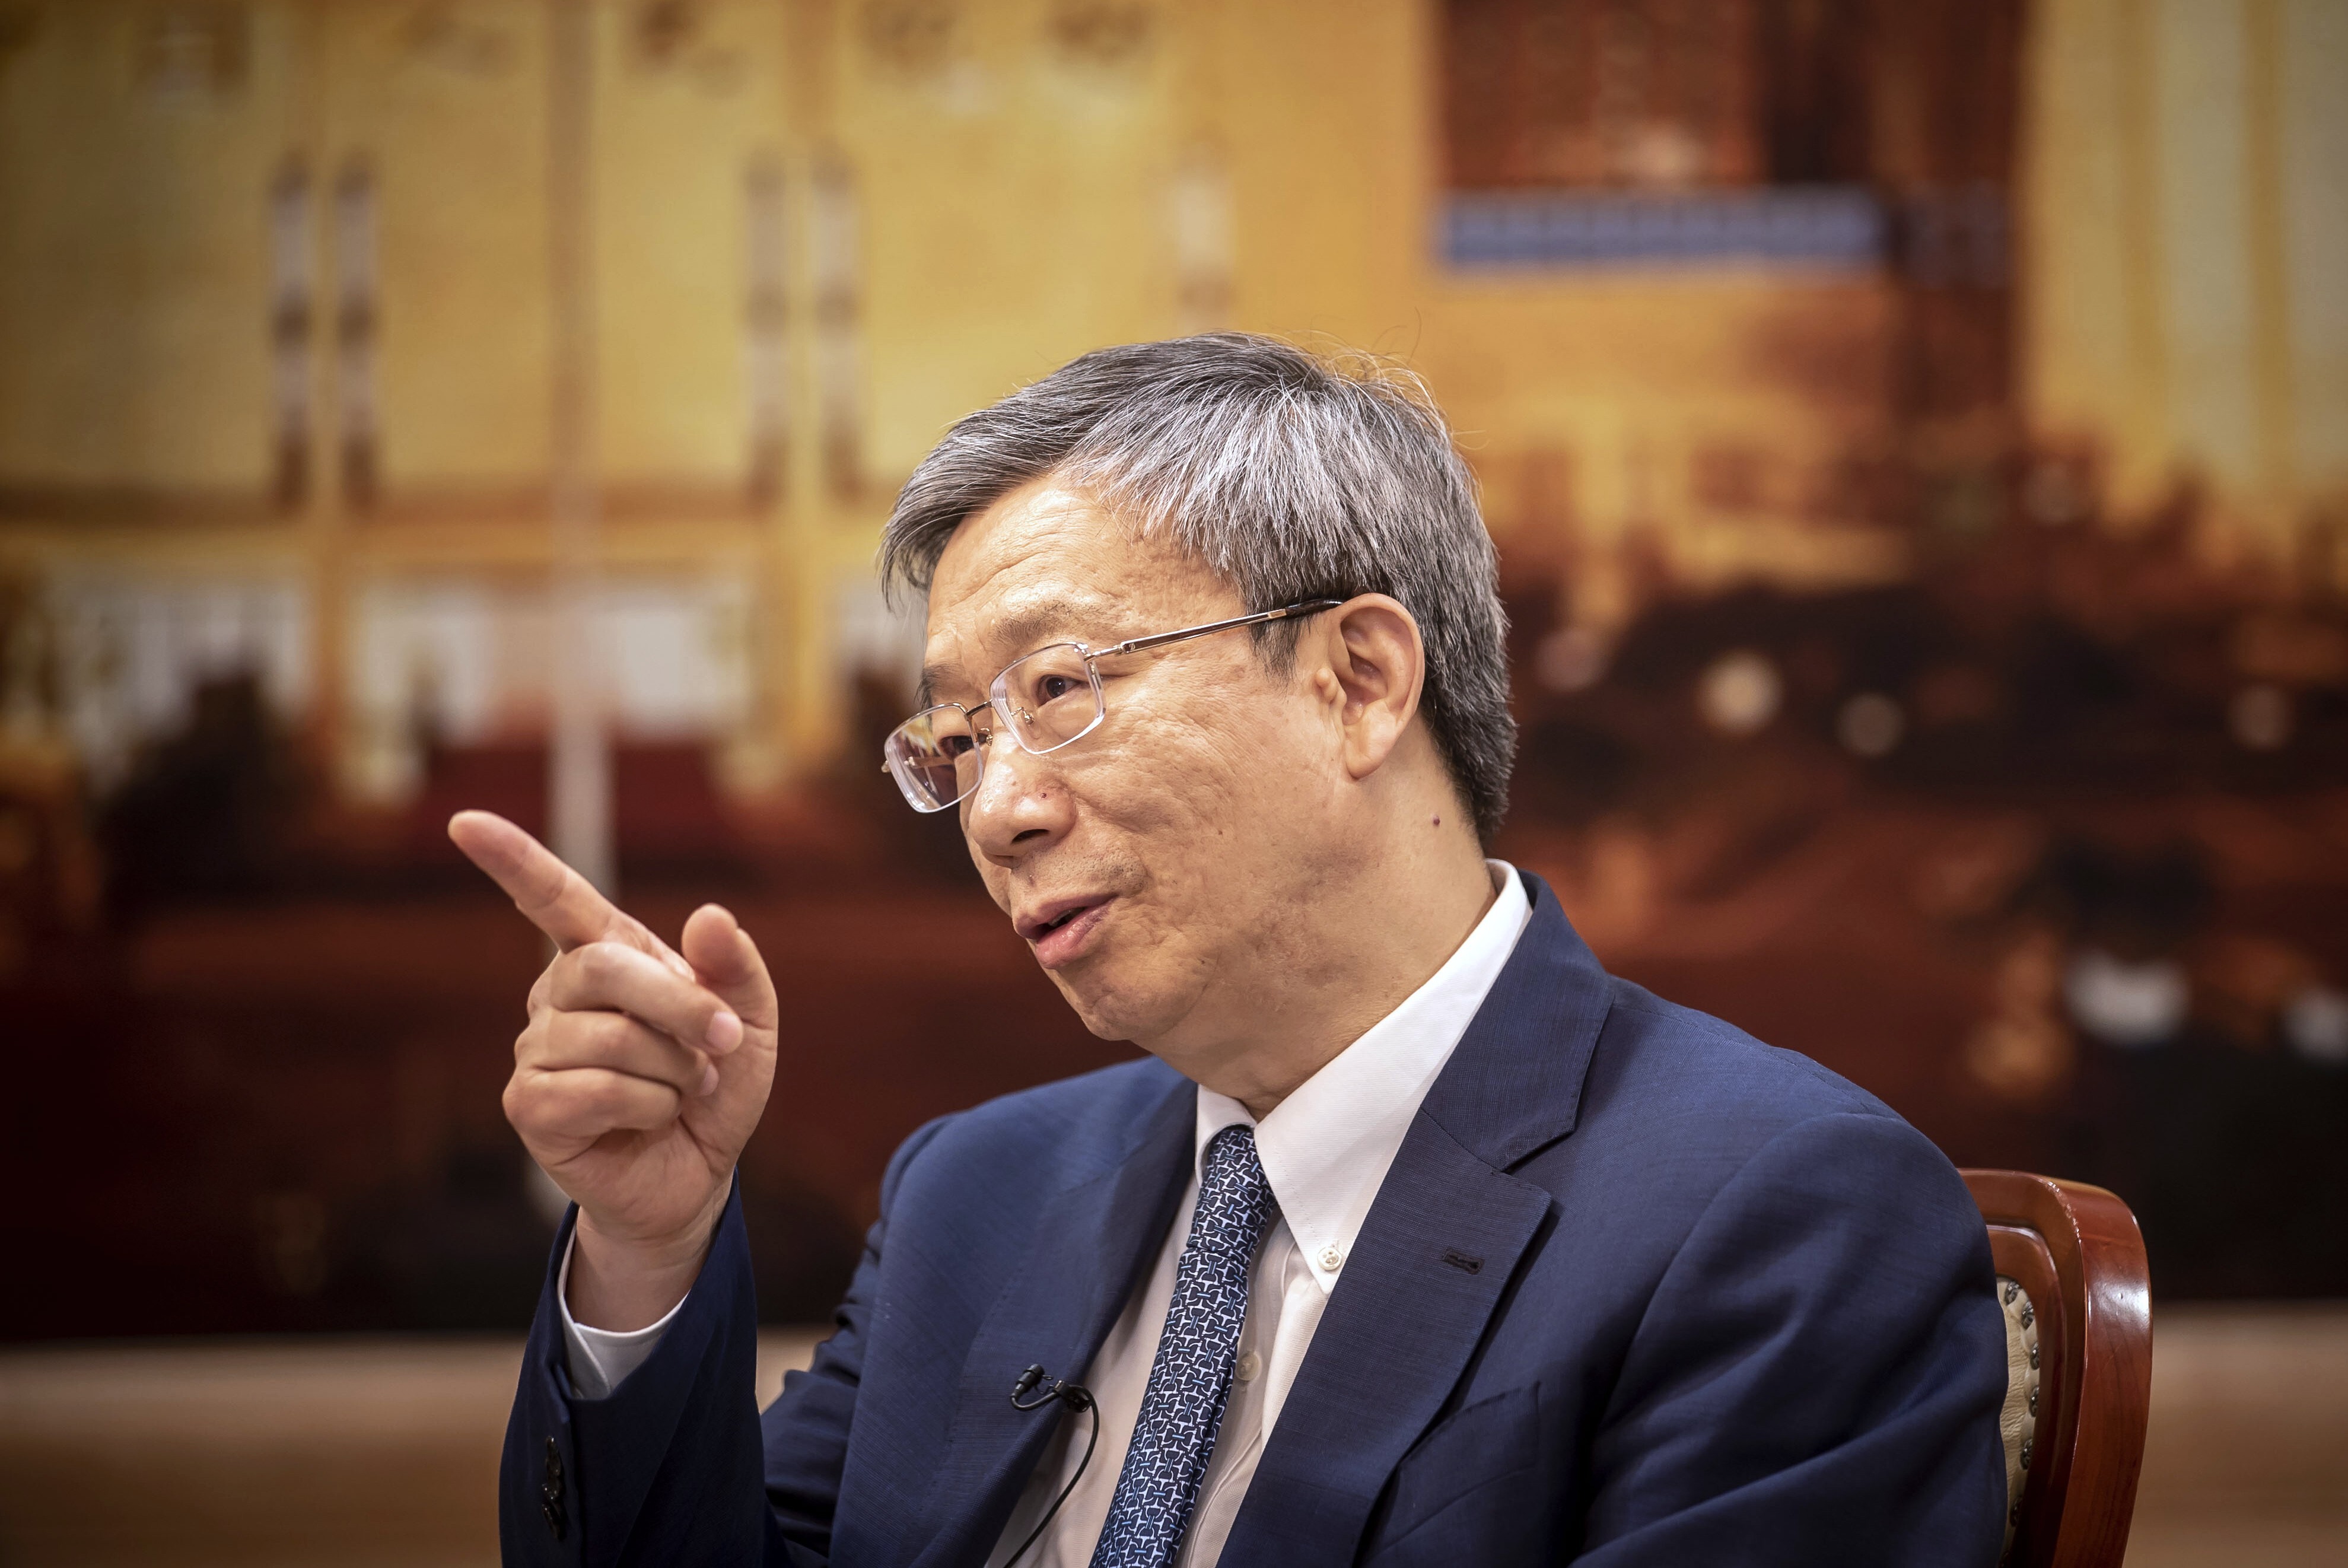 Yi Gang, governor of the People’s Bank of China, gestures during an interview in Beijing on June 7, 2019. Photo: Bloomberg